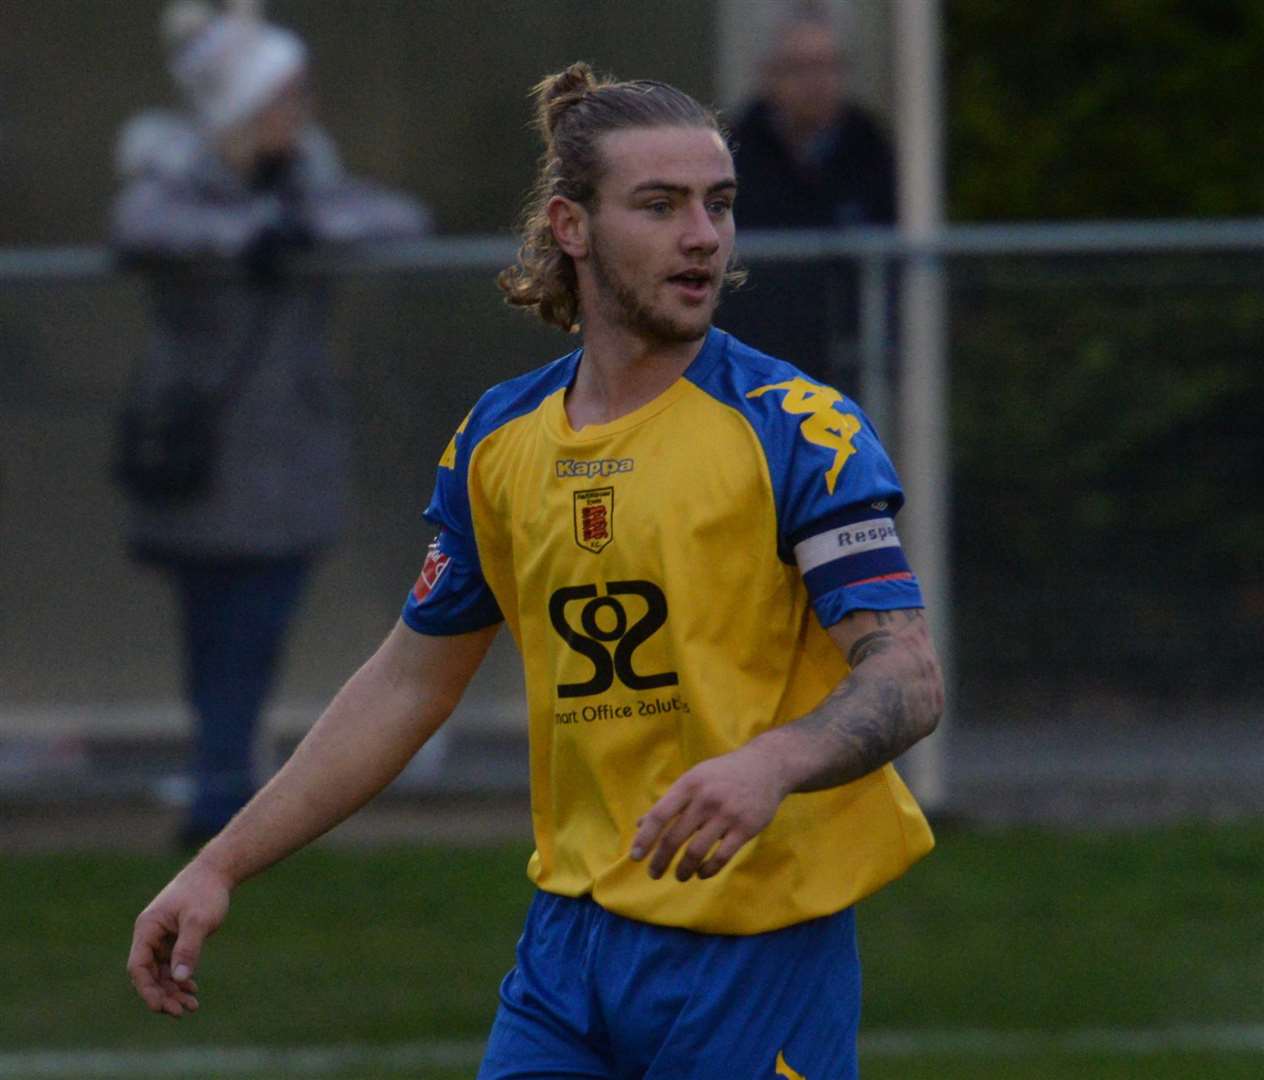 Lewis Chambers has also played for Faversham Picture: Chris Davey